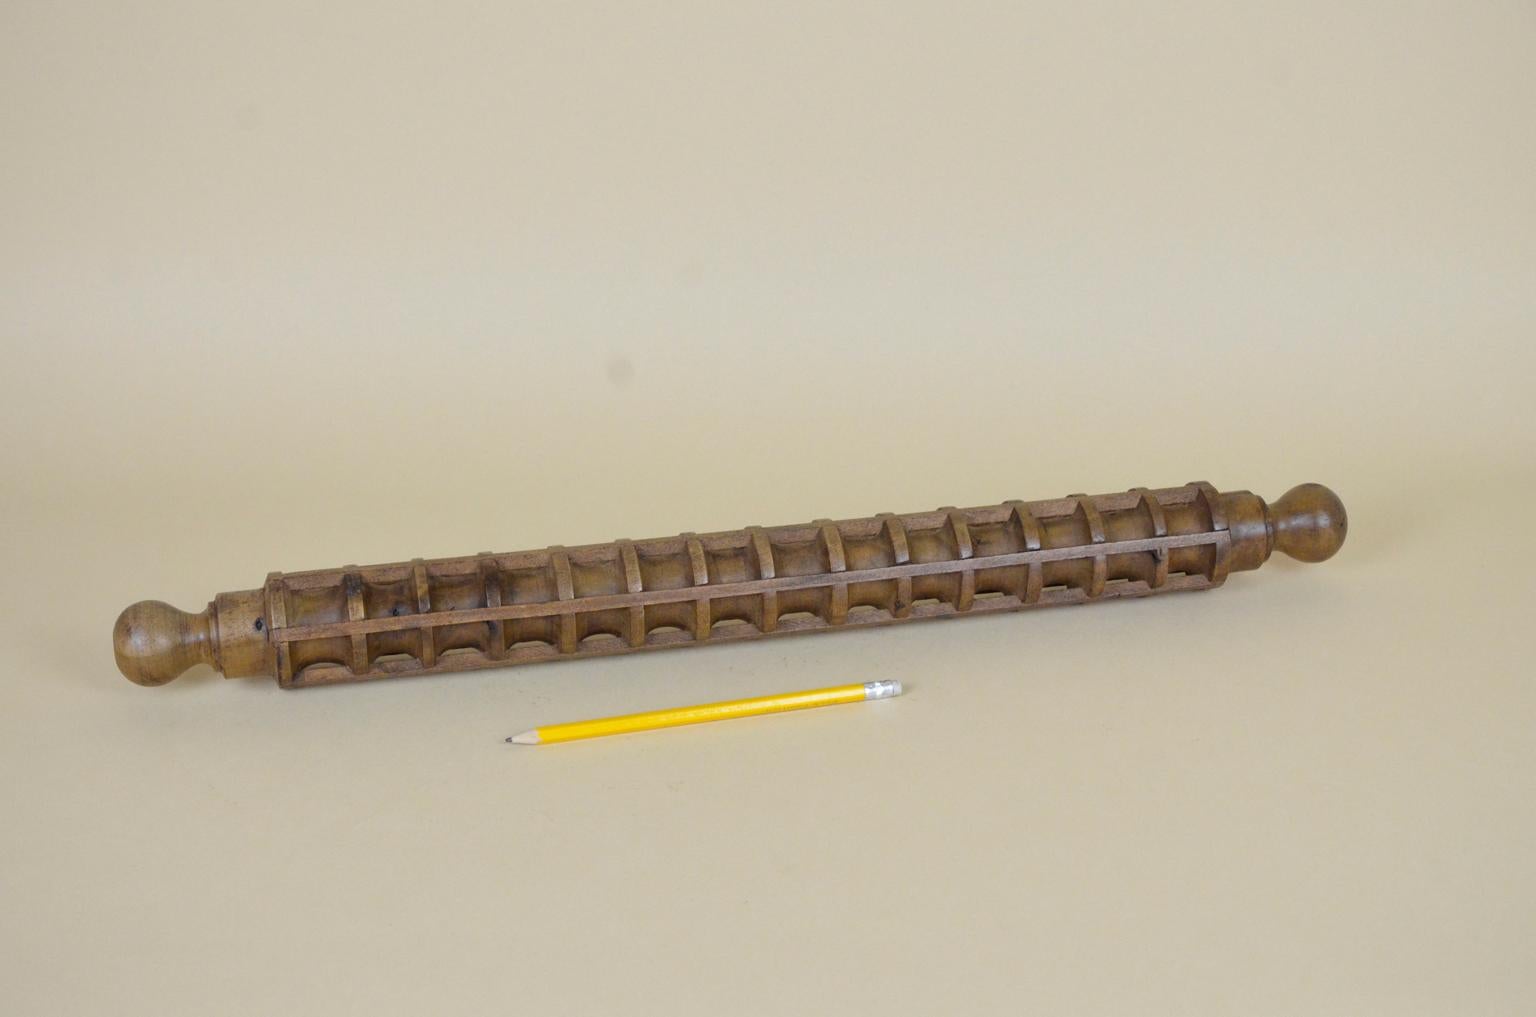 This vintage Italian ravioli rolling pin from early 20th century is in perfect conditions.

Can still be used as display or for making amazing and tasty Italian style ravioli.

Collector's note:

Ravioli are a type of dumpling composed of a